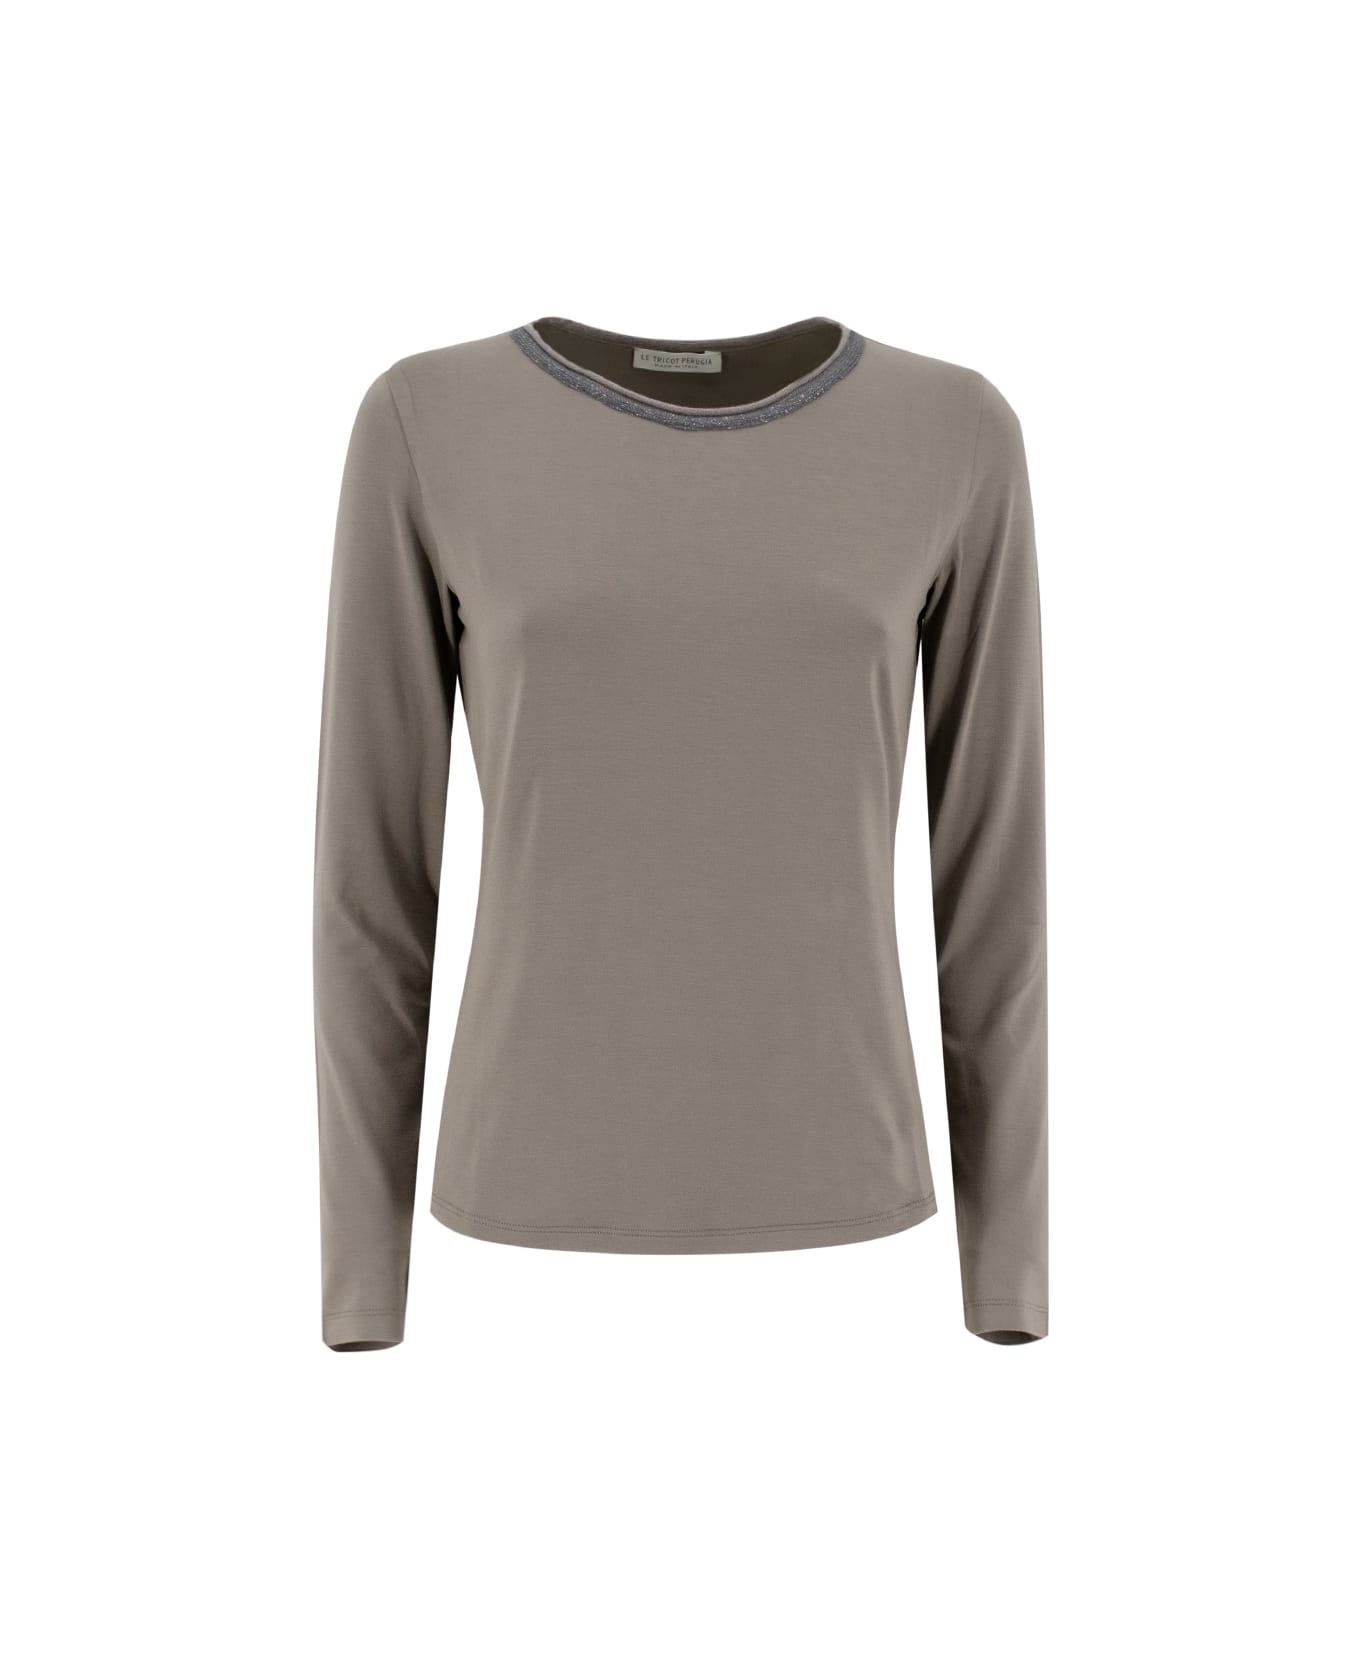 Le Tricot Perugia Sweater - TAUPE/AUPE/D.GREY ニットウェア